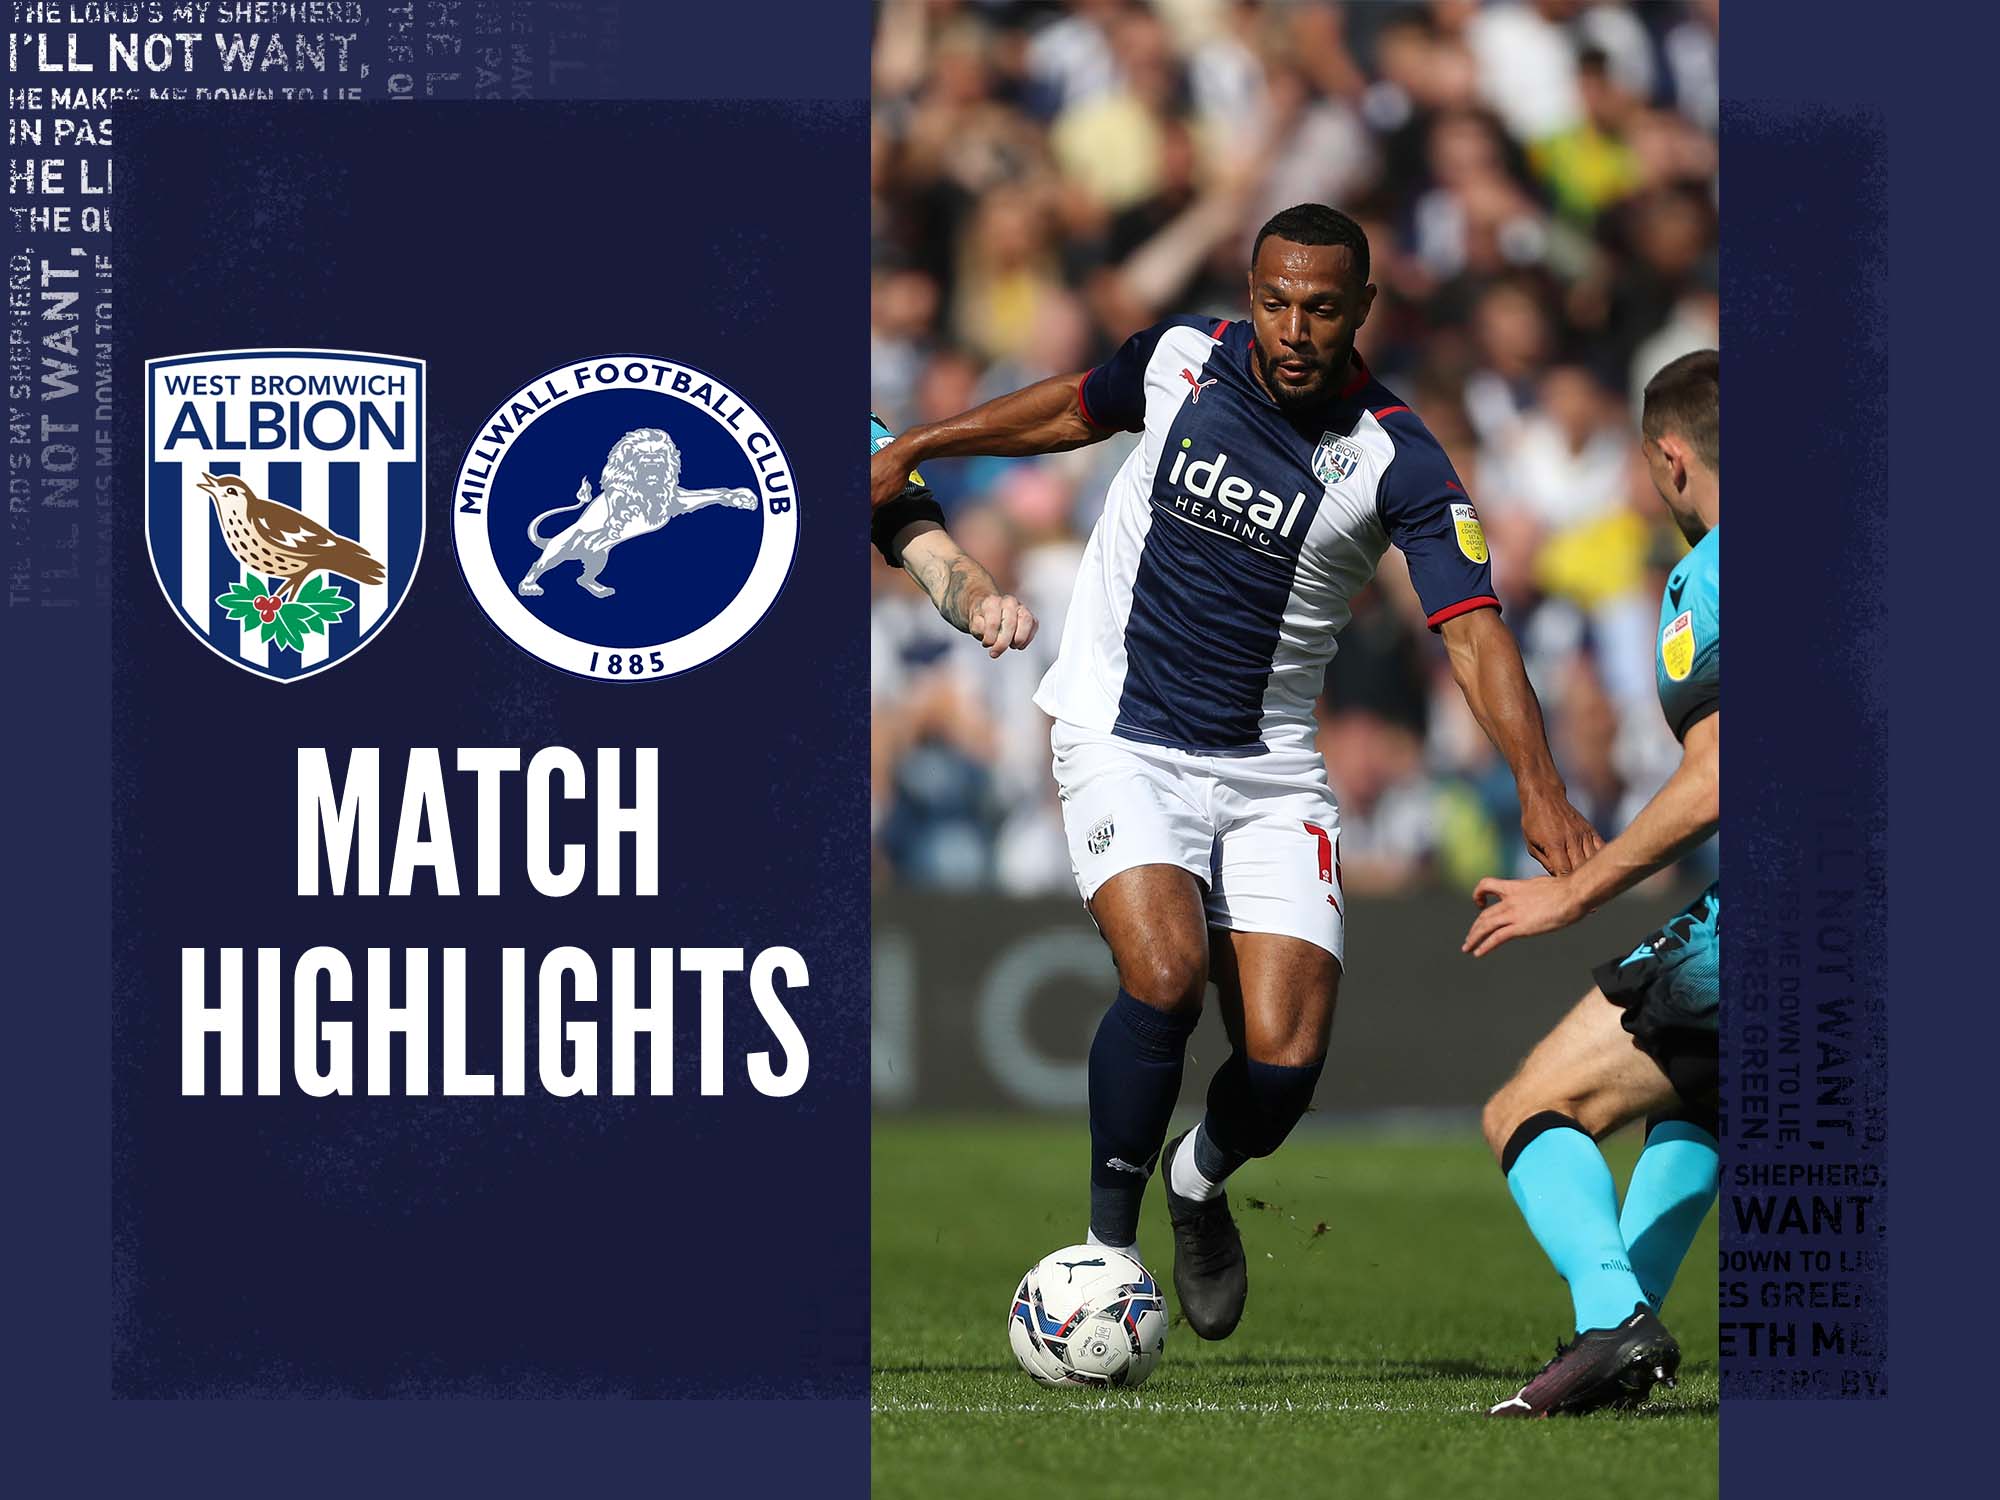 Albion v Millwall match highlights West Bromwich Albion